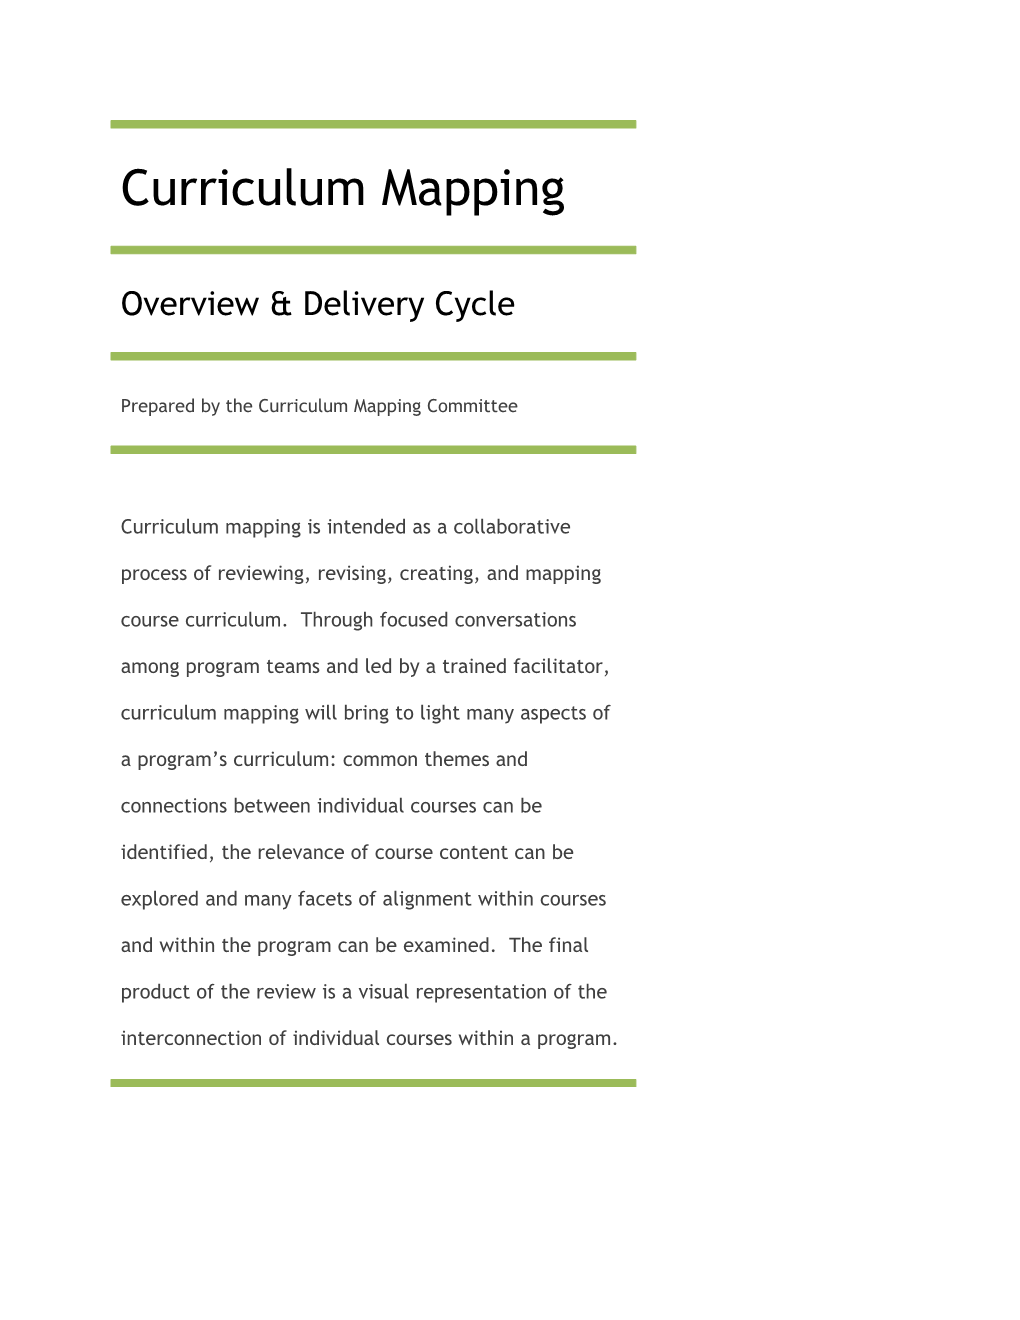 Curriculum Mapping Can Serve Many Purposes, Depending on the Perspective of Thestakeholder